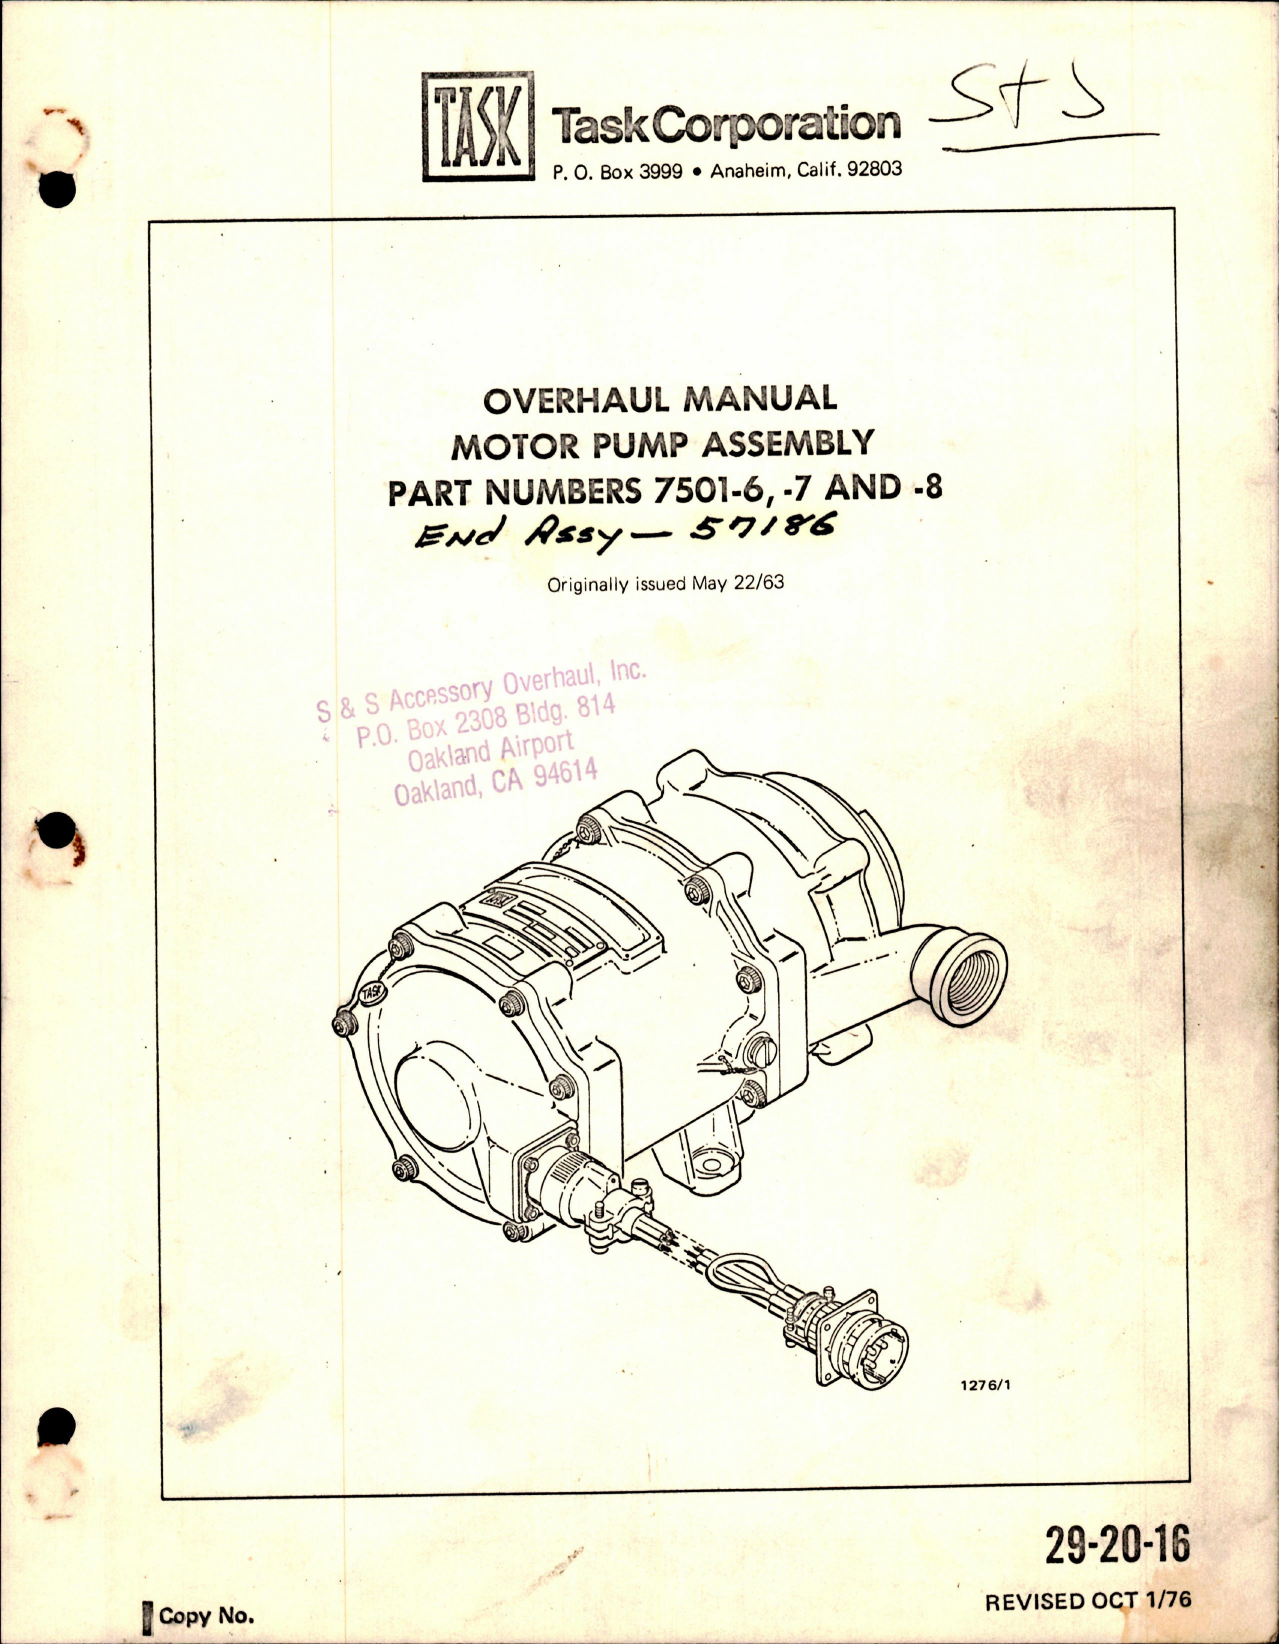 Sample page 1 from AirCorps Library document: Overhaul Manual for Motor Pump Assembly - Parts 7501-6, -7 and -8 